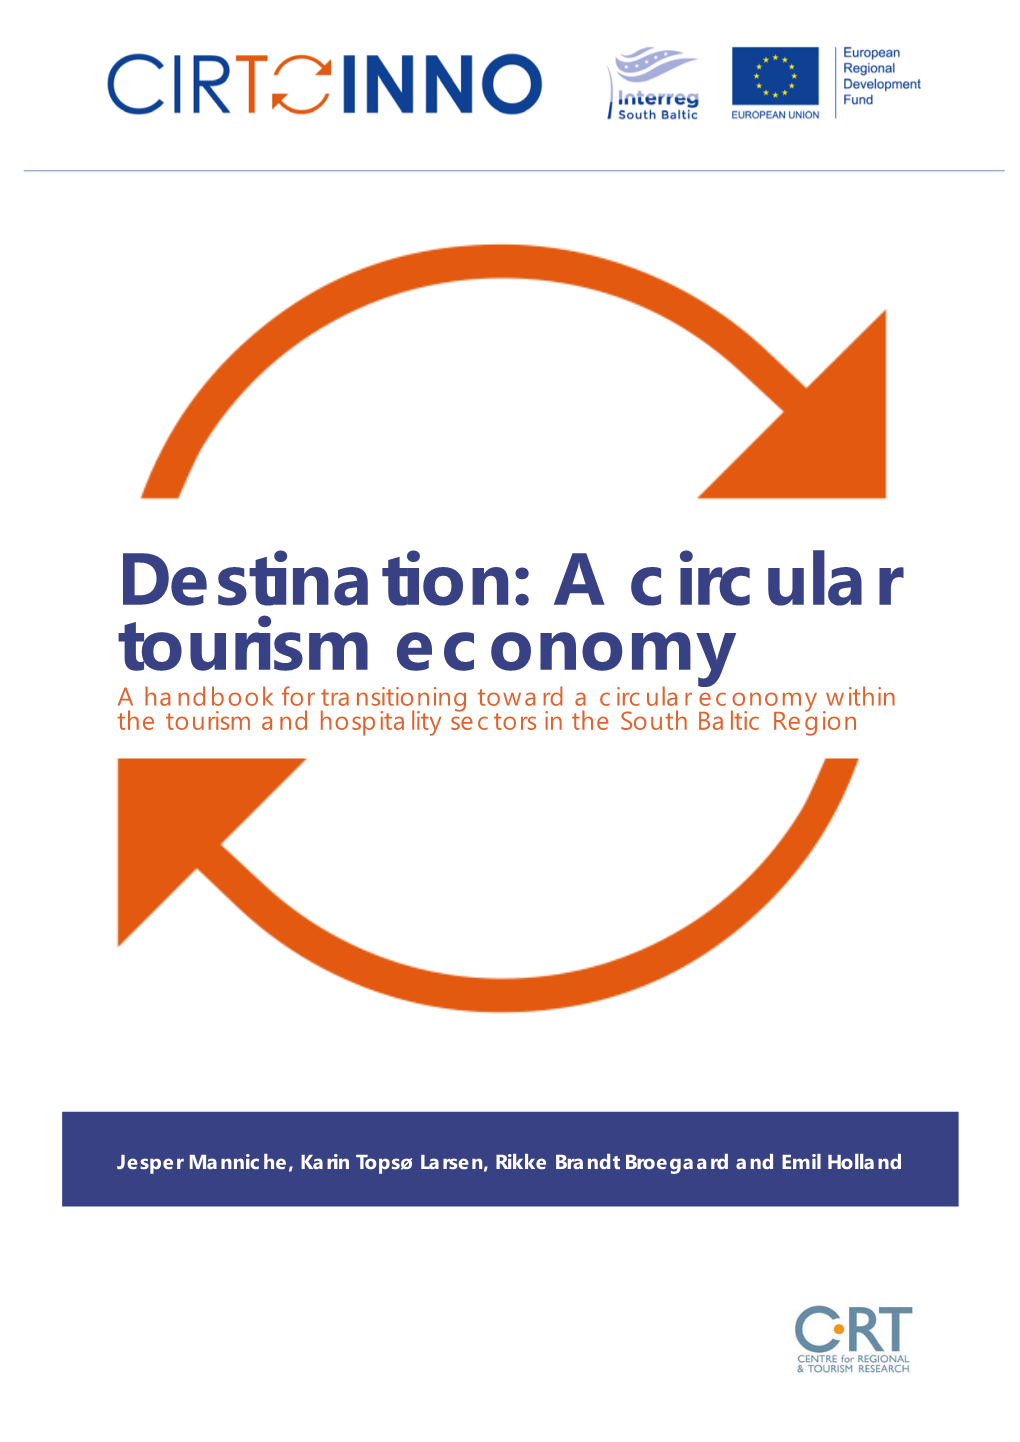 Destination: a Circular Tourism Economy a Handbook for Transitioning Toward a Circular Economy Within the Tourism and Hospitality Sectors in the South Baltic Region